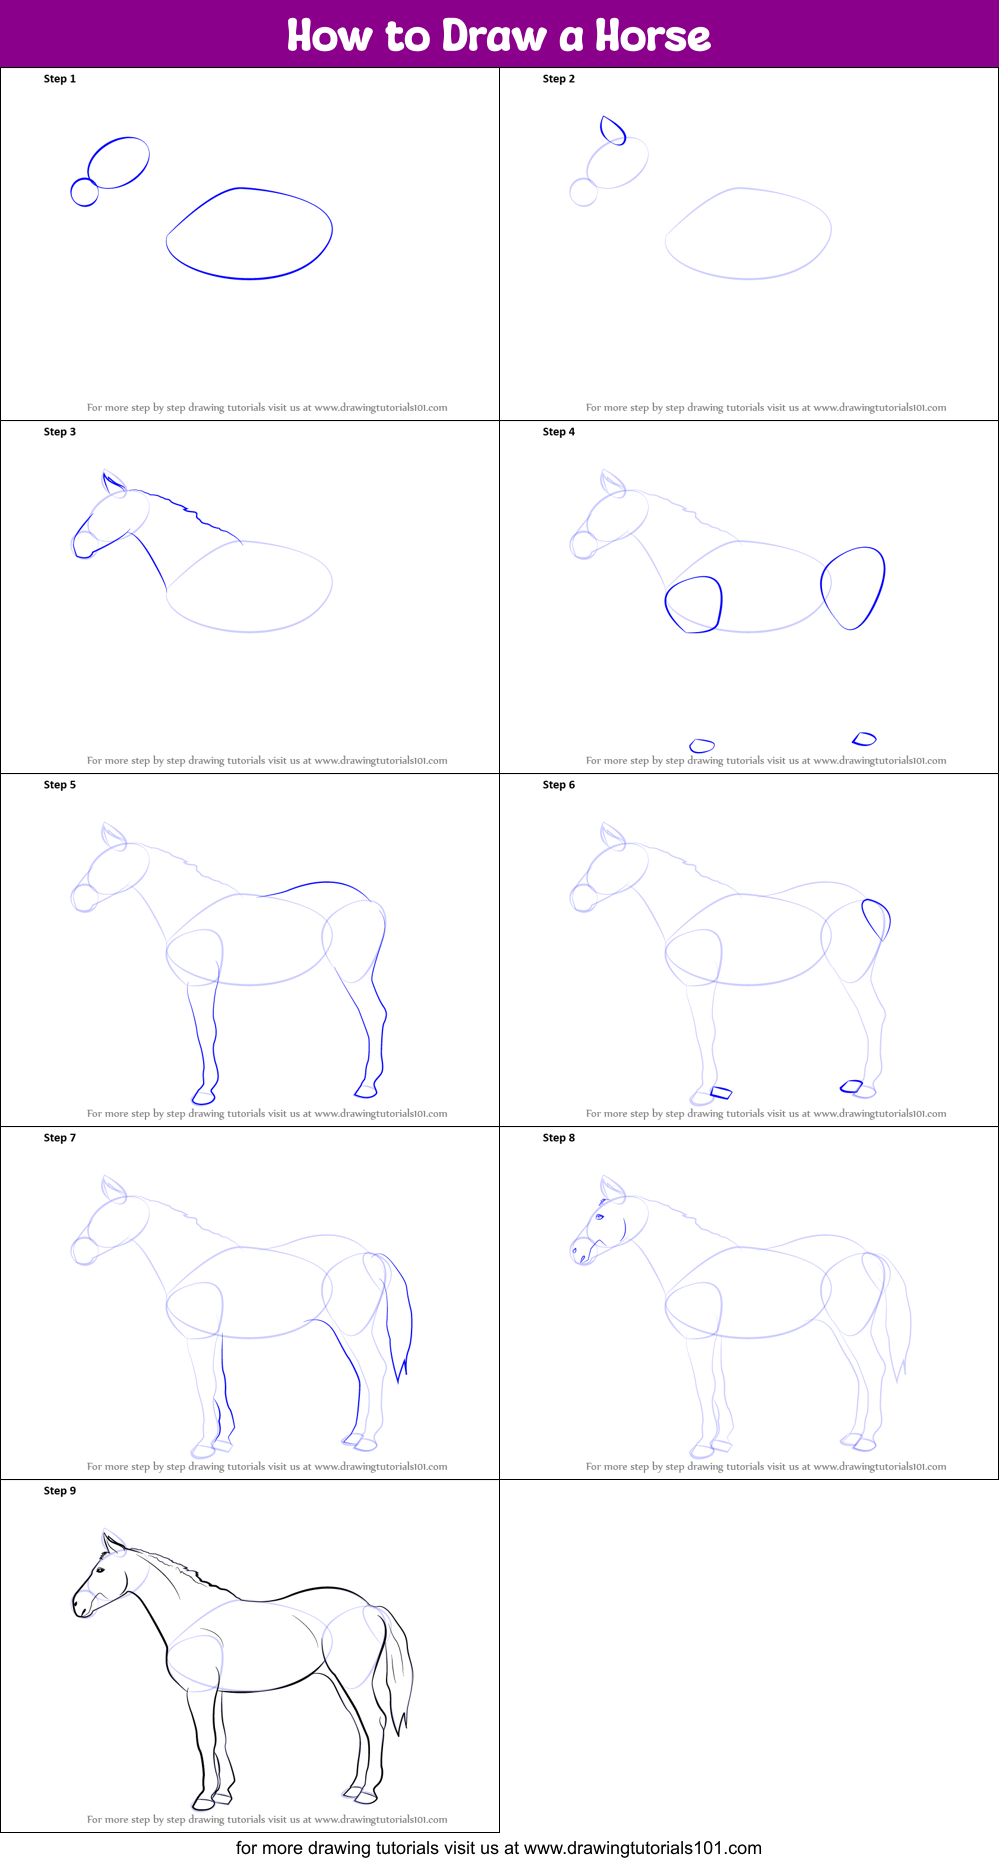 how to draw a horse easy step by step How to draw a horse step by step